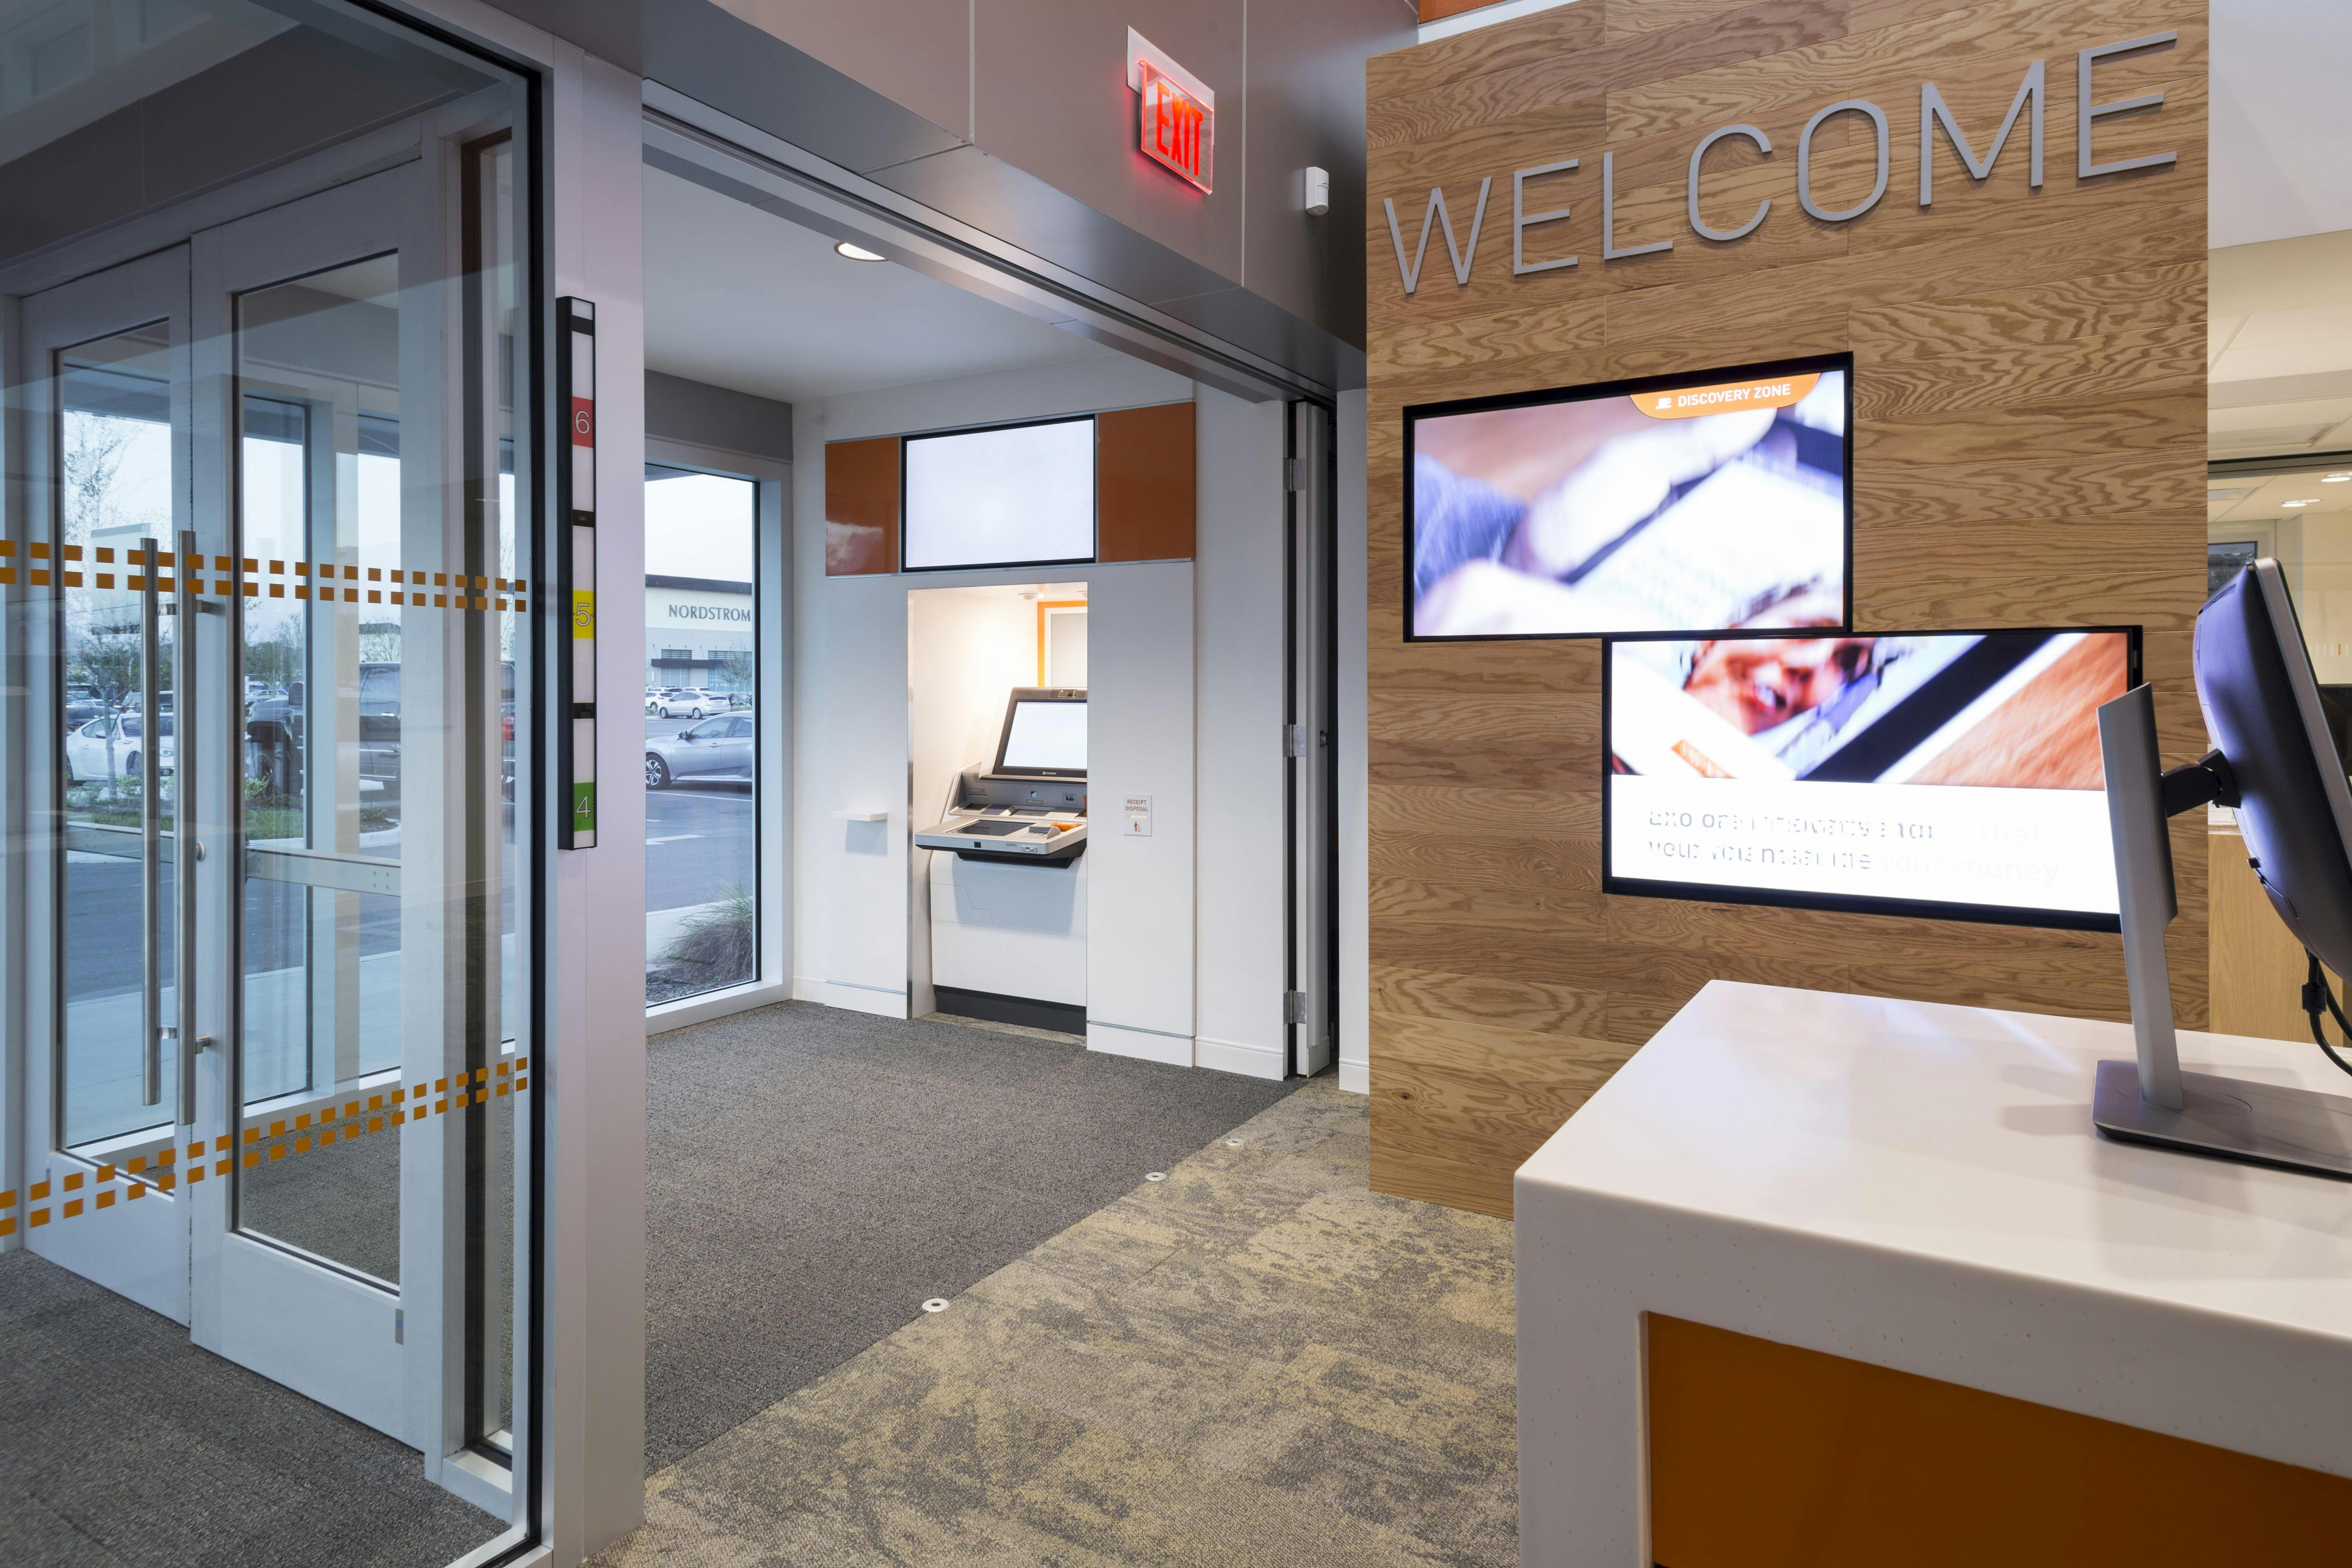 Opening glass walls and ATM bank vestibules